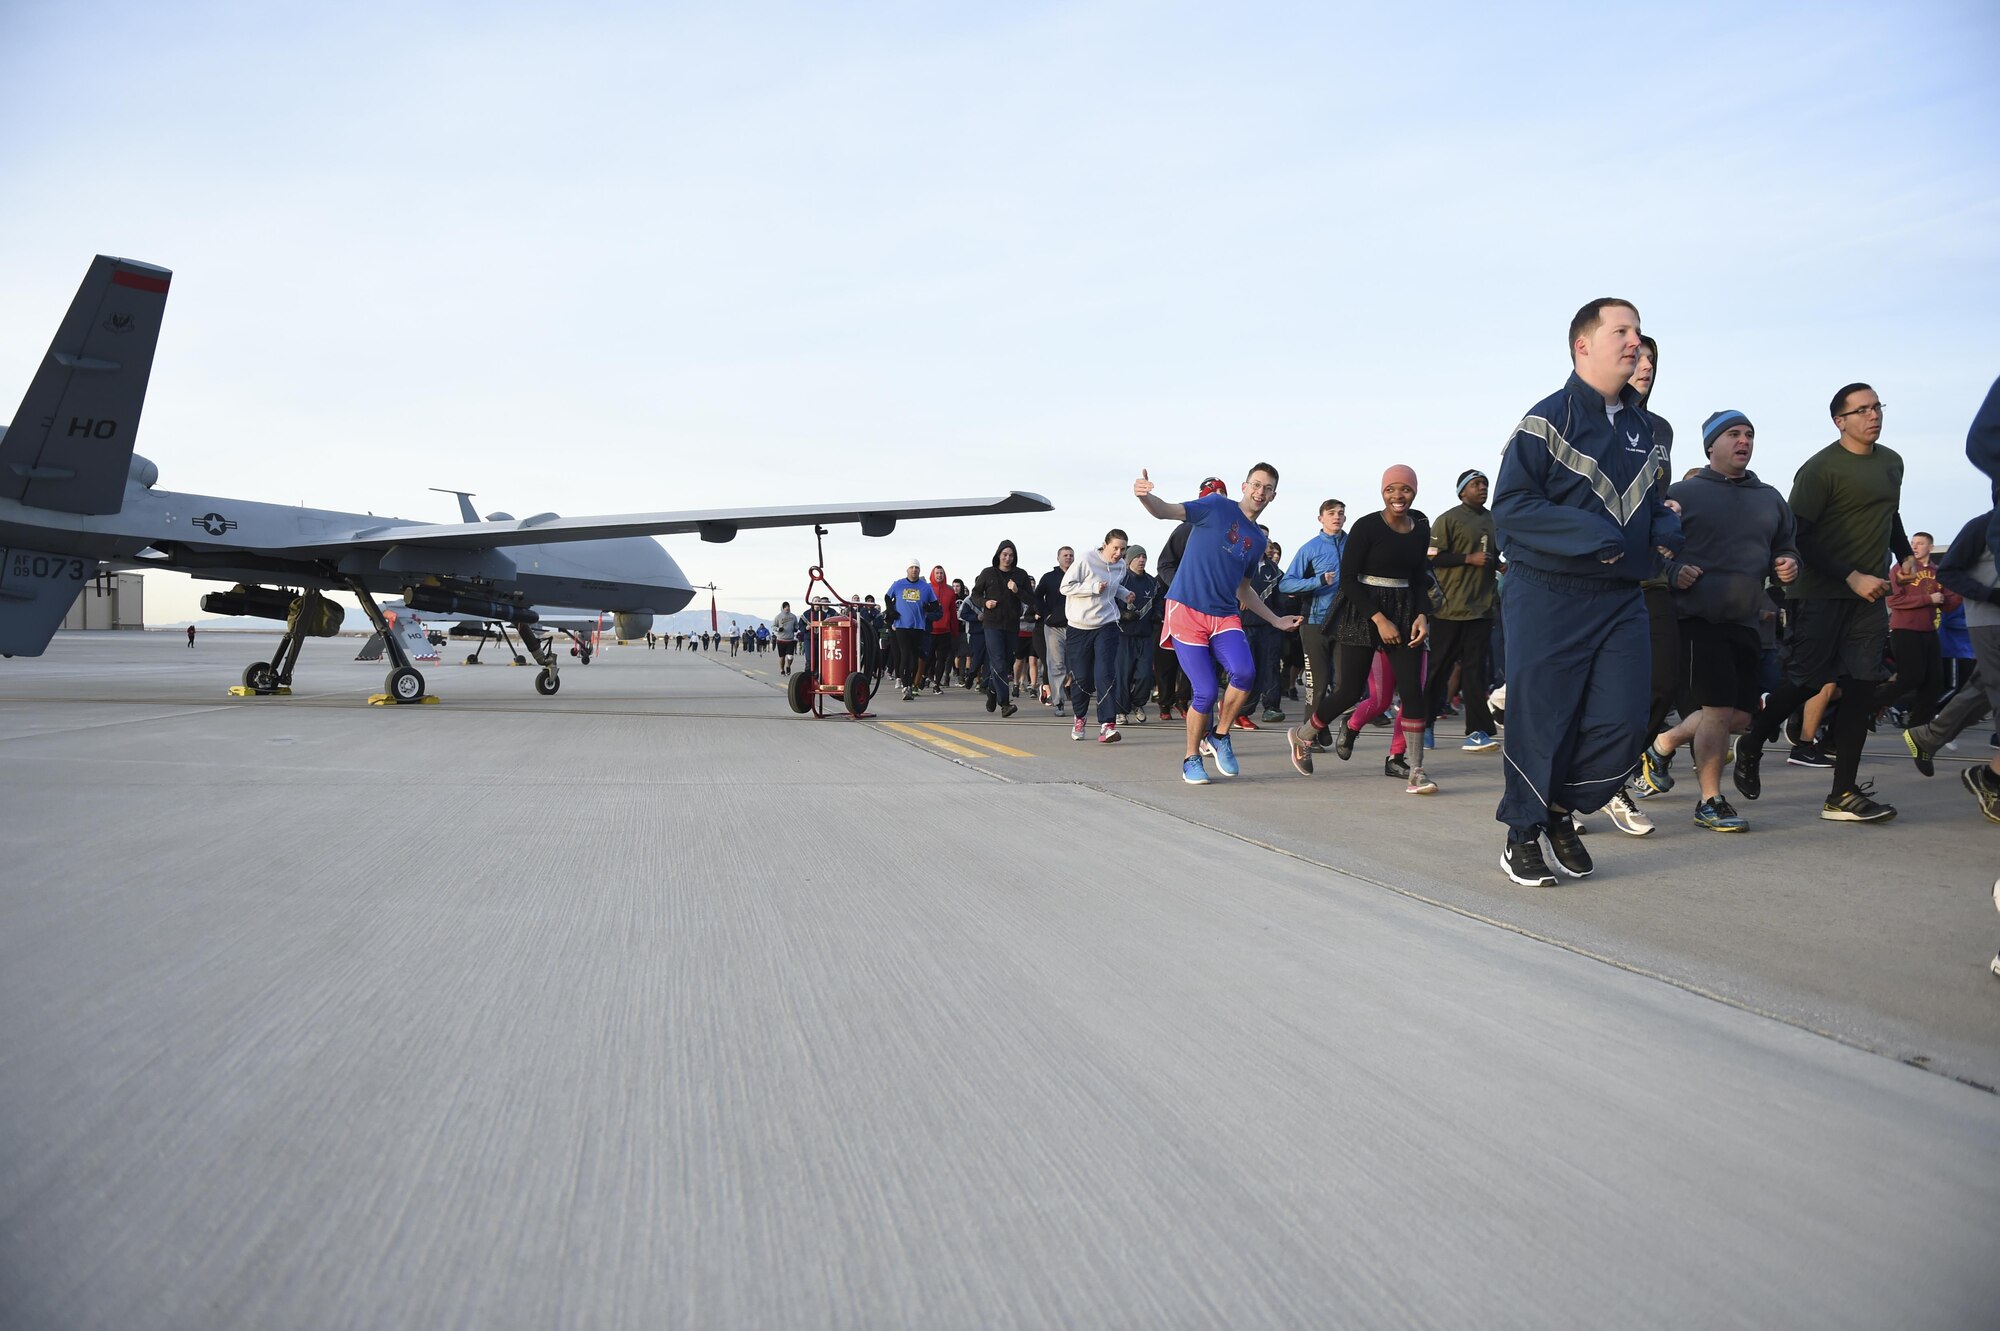 Holloman Air Force Base participated in the Proud to be a 49'er Fun Run Jan. 3, 2017 to ring in the New Year. The run was held on the flight line with an option to run 1.5 mile or a 5K. Participants were encouraged to show their pride by wearing anything that demonstrated their Air Force pride, such as a favorite team jersey or a fun costume. (U.S. Air Force photo by Staff Sgt. Stacy Jonsgaard)